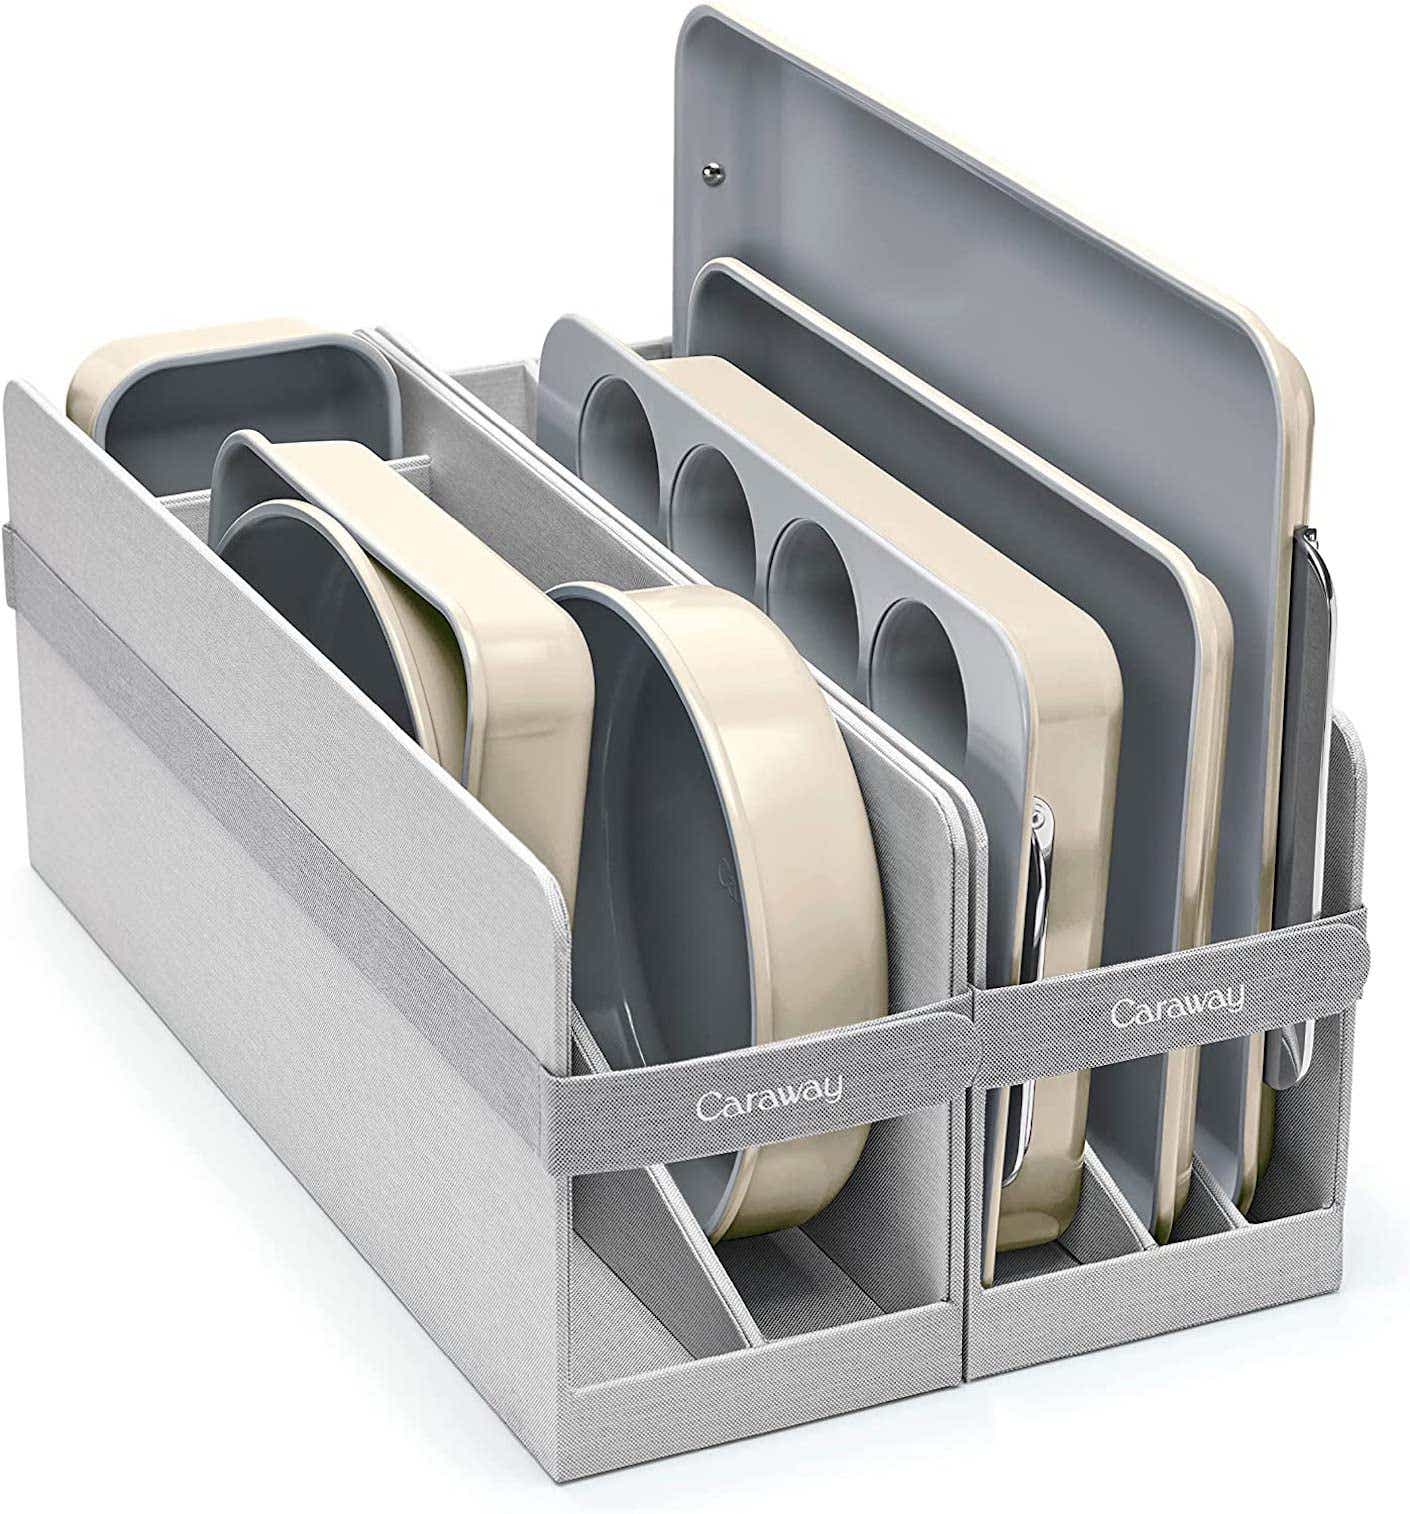 A set of metal bakeware is stacked on a metal shelf.